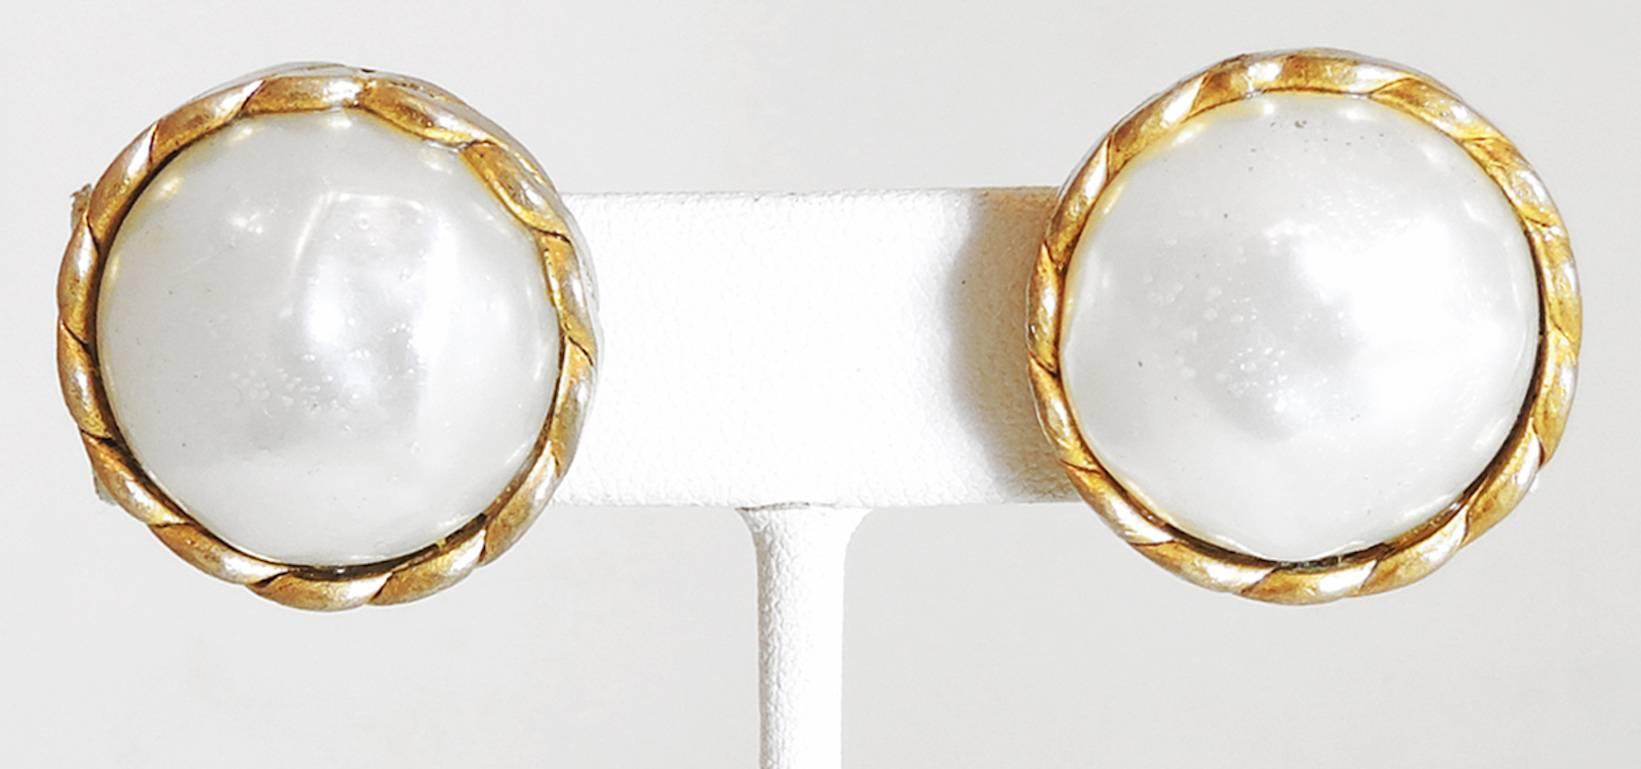 These vintage Chanel faux pearl clip-on earrings date back from 1984. The design has a large Chanel glass faux pearl in the center with a twisted rope design frame. They measure 1” x 1”. They are signed “Chanel” with the double “CC 1984”. They are